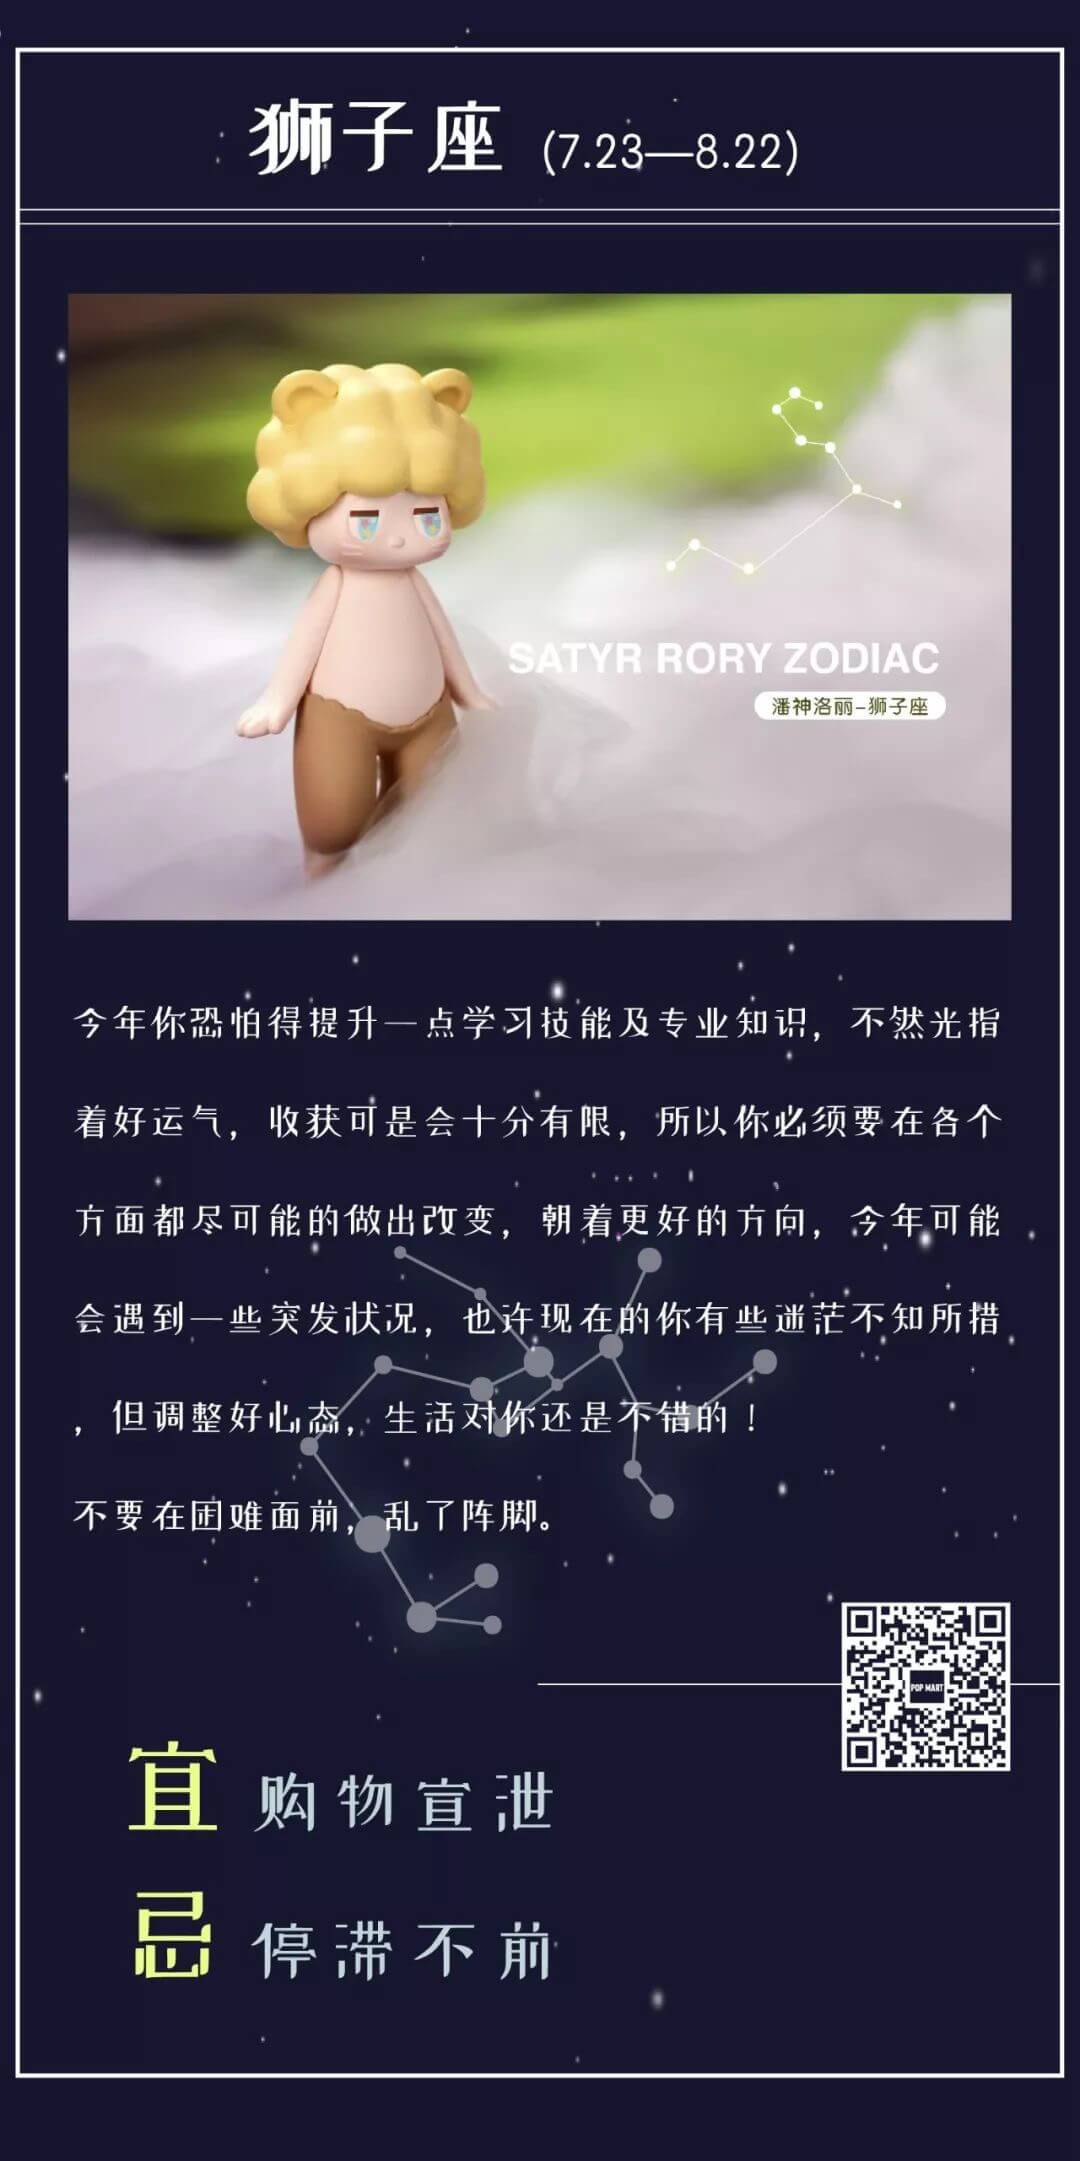 Satyr-Rory-Zodic-Edition-Mini-Series-by-Seulgie-Lee-x-POP-MART-the-toy-chronicle-2019-221